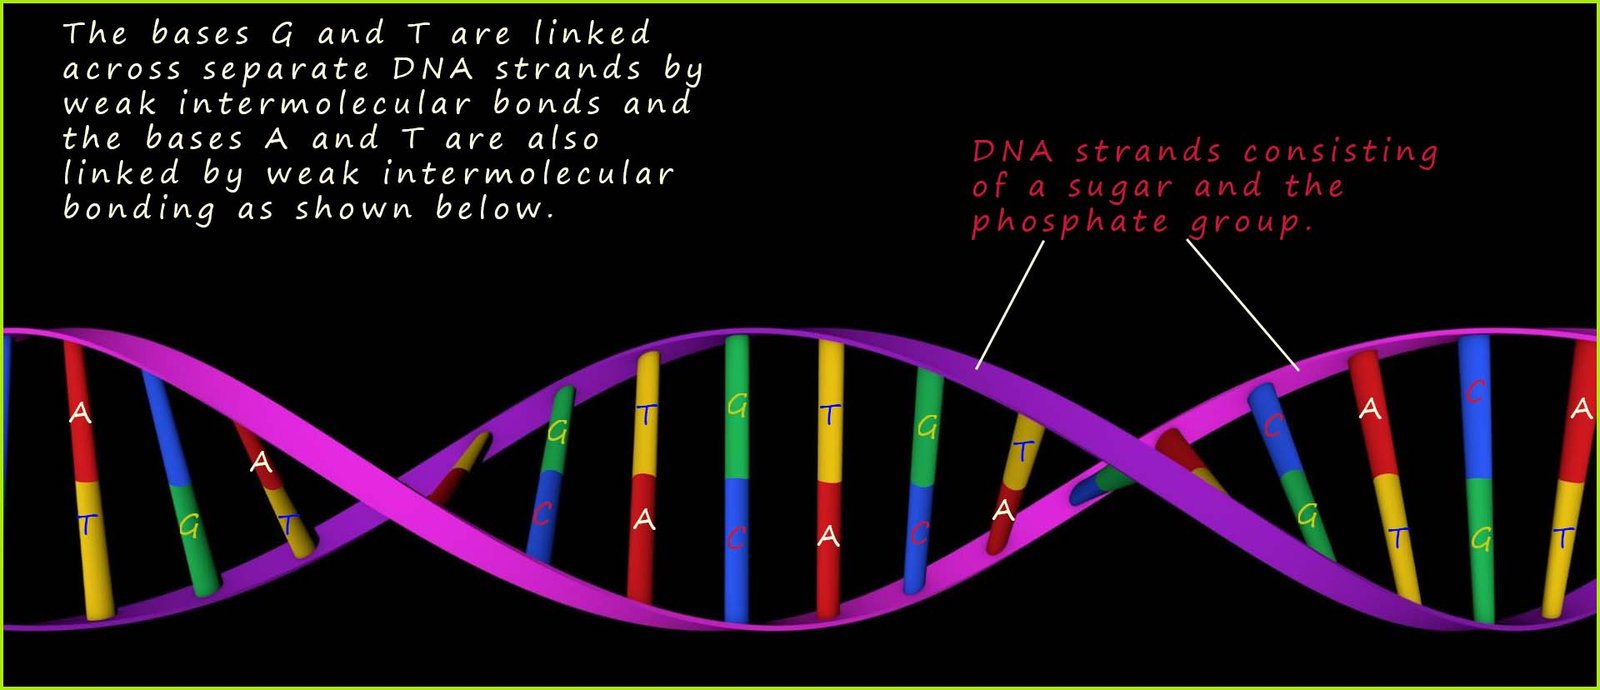 DNA double helix structure showing the base pairs linking across the strands.